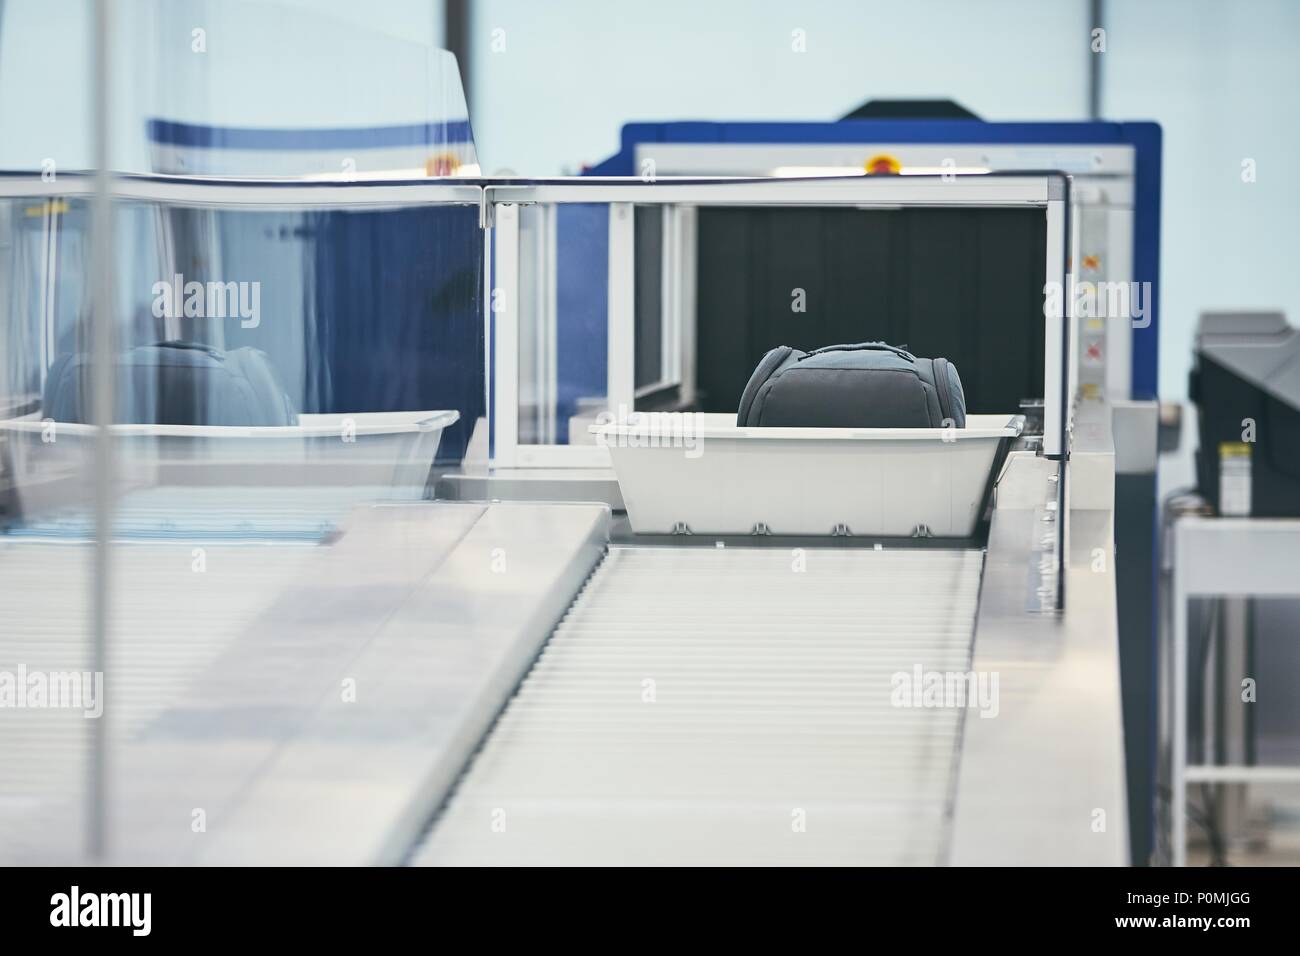 Airport security check. Containers with luggage on conveyor belt after x-ray control. Stock Photo